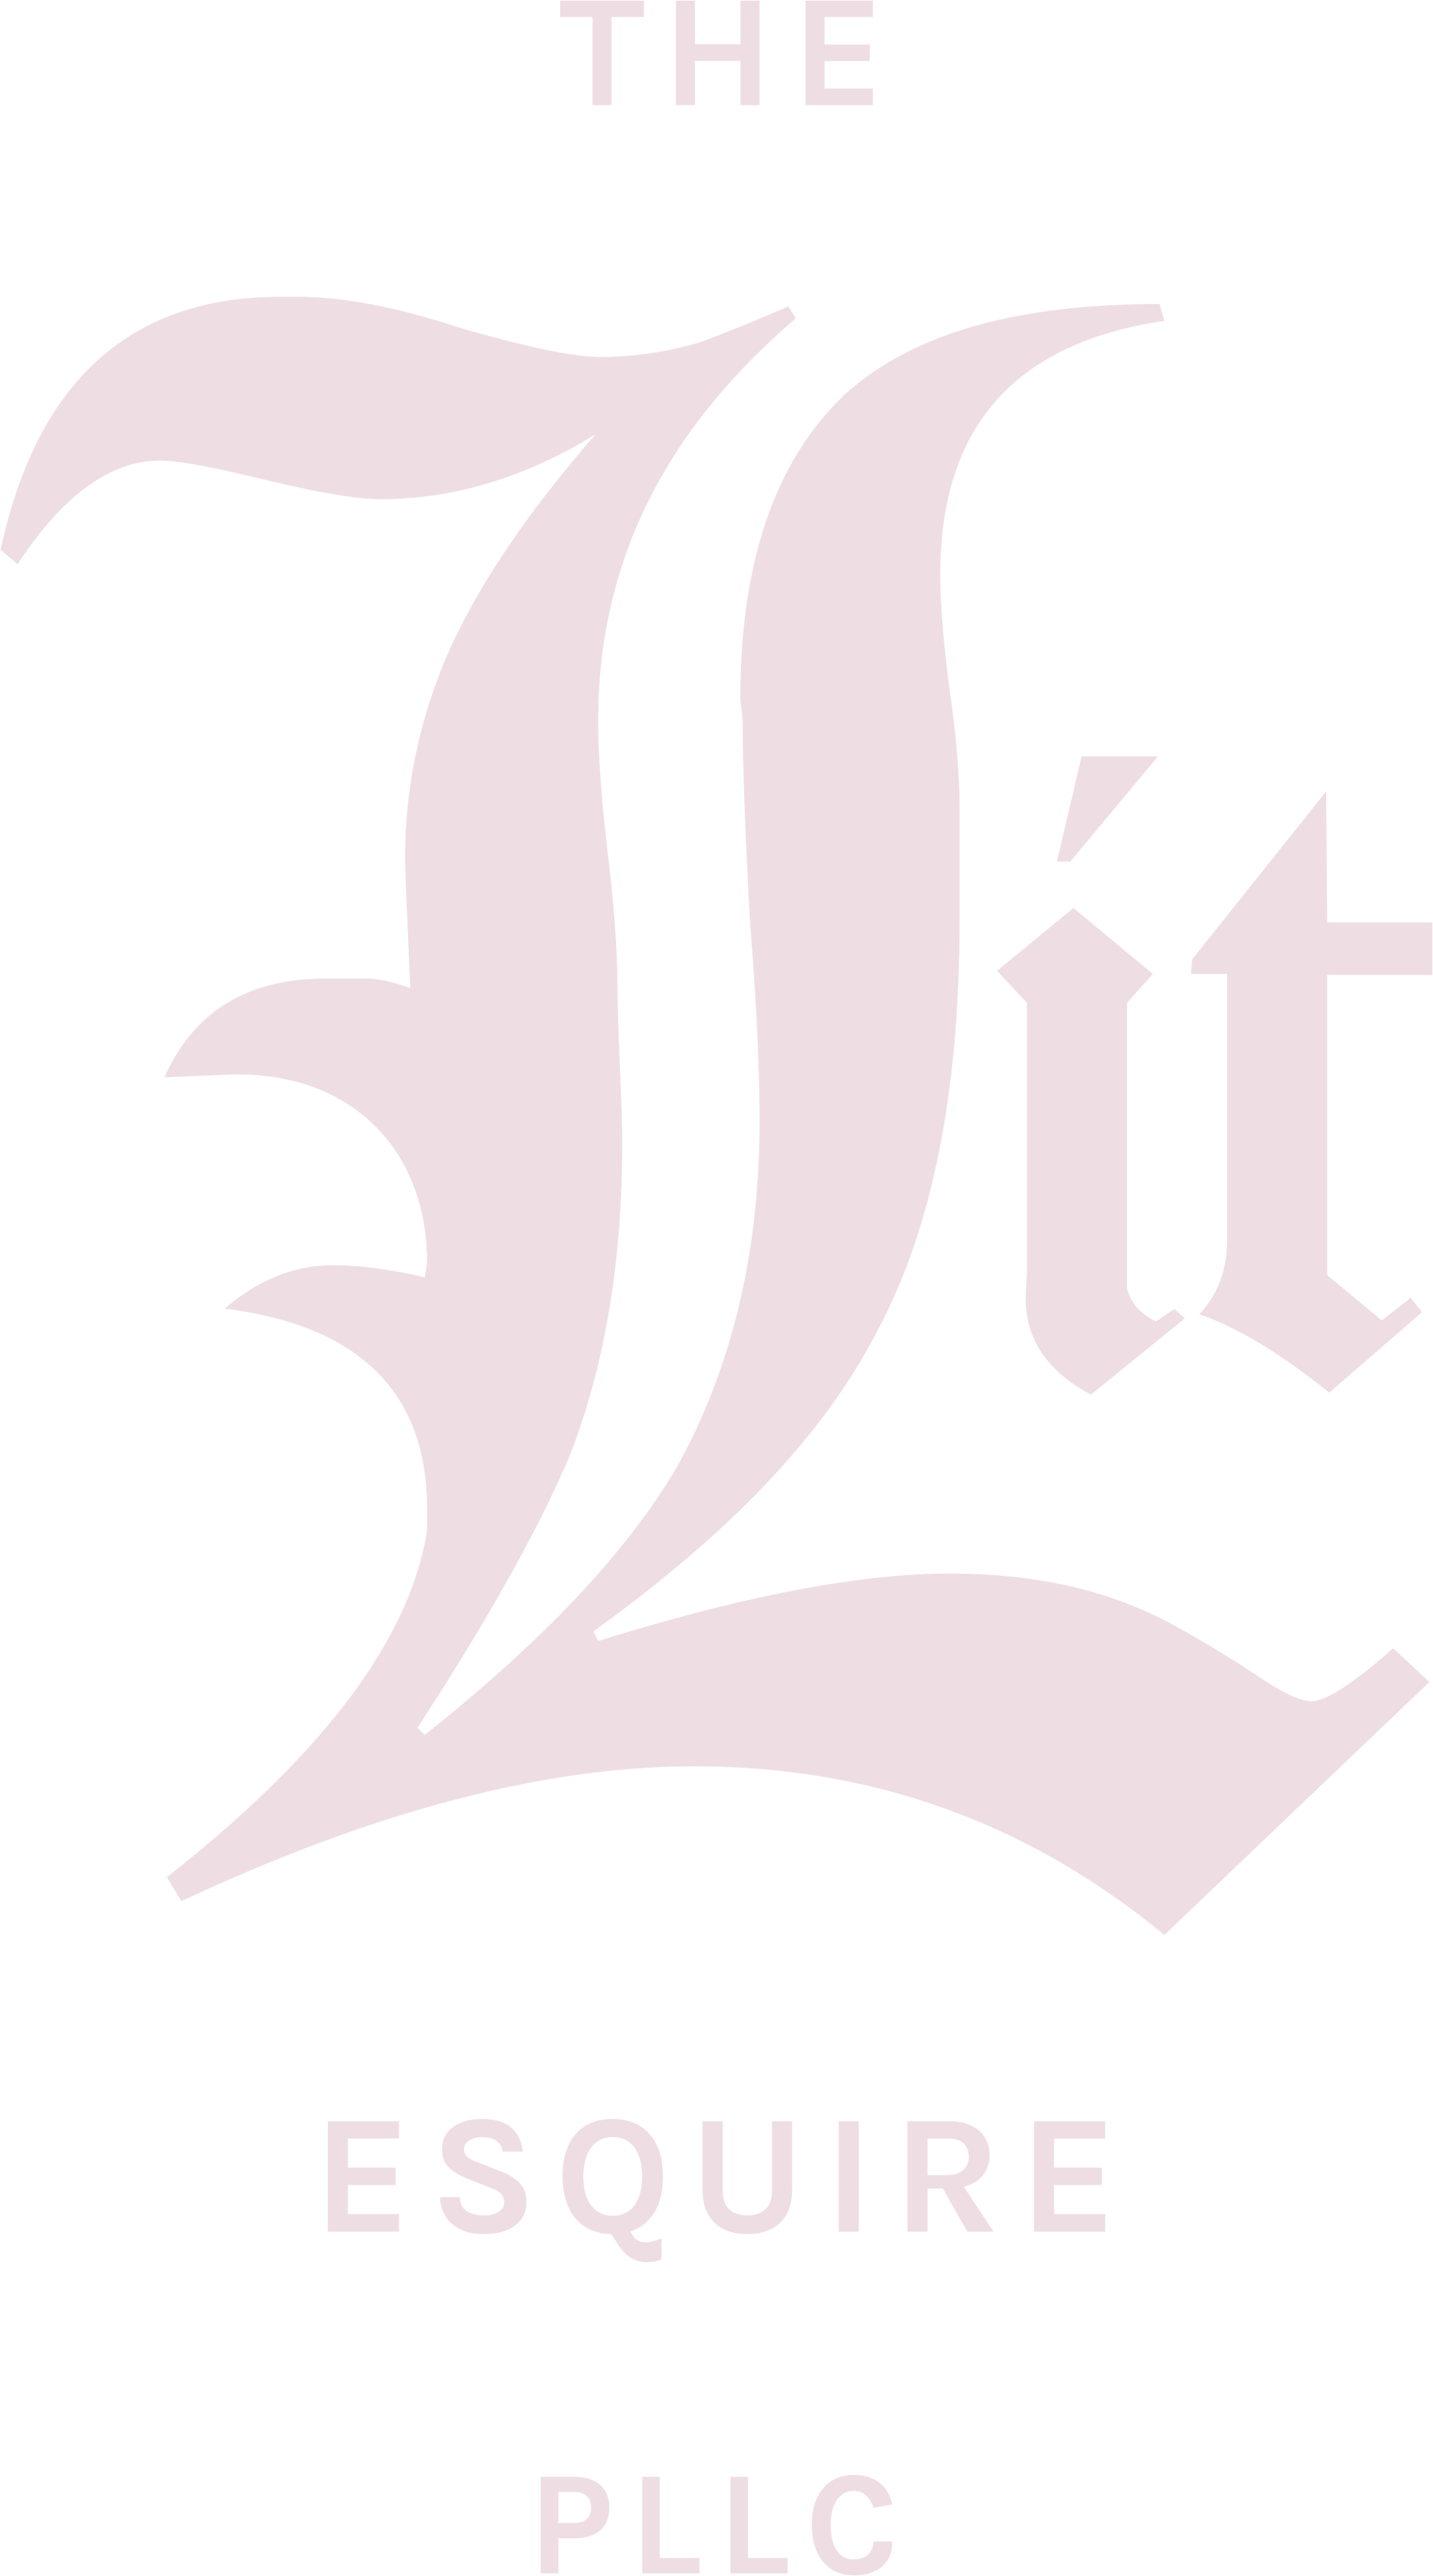 The Lit Esquire Logo in GIF format flashing between hot pink and white